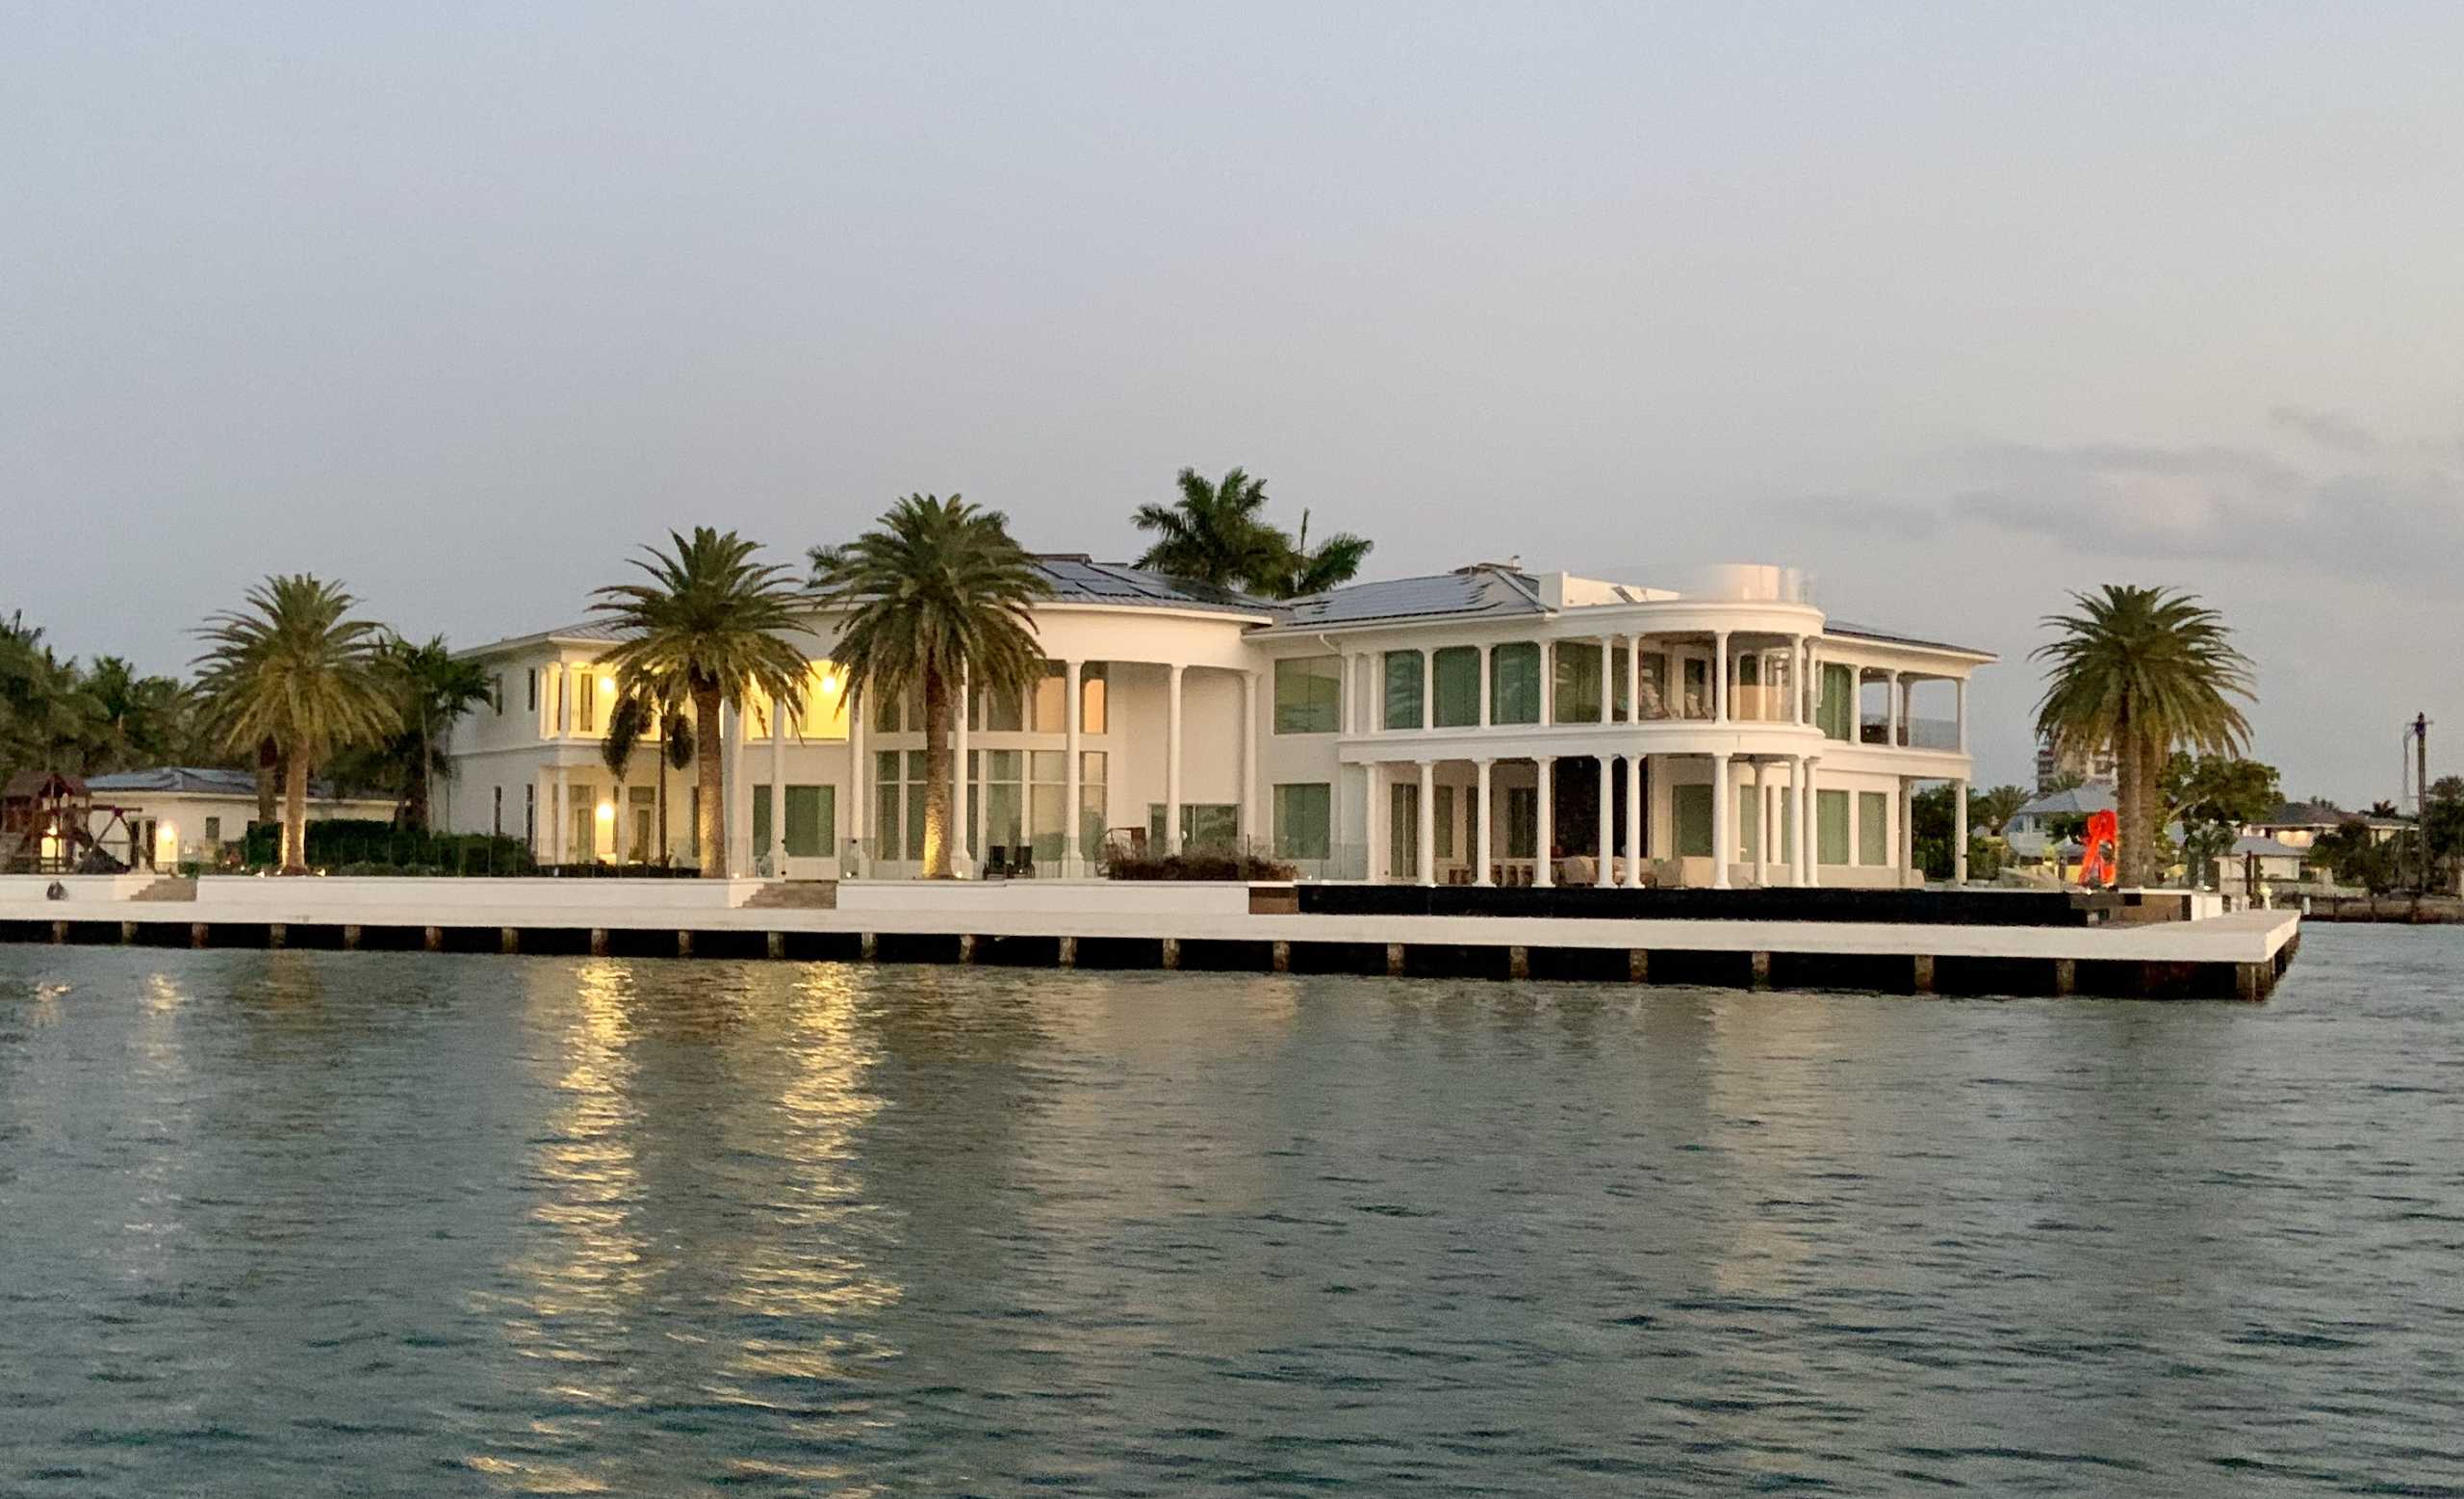 Waterfront Homes on the Intracoastal